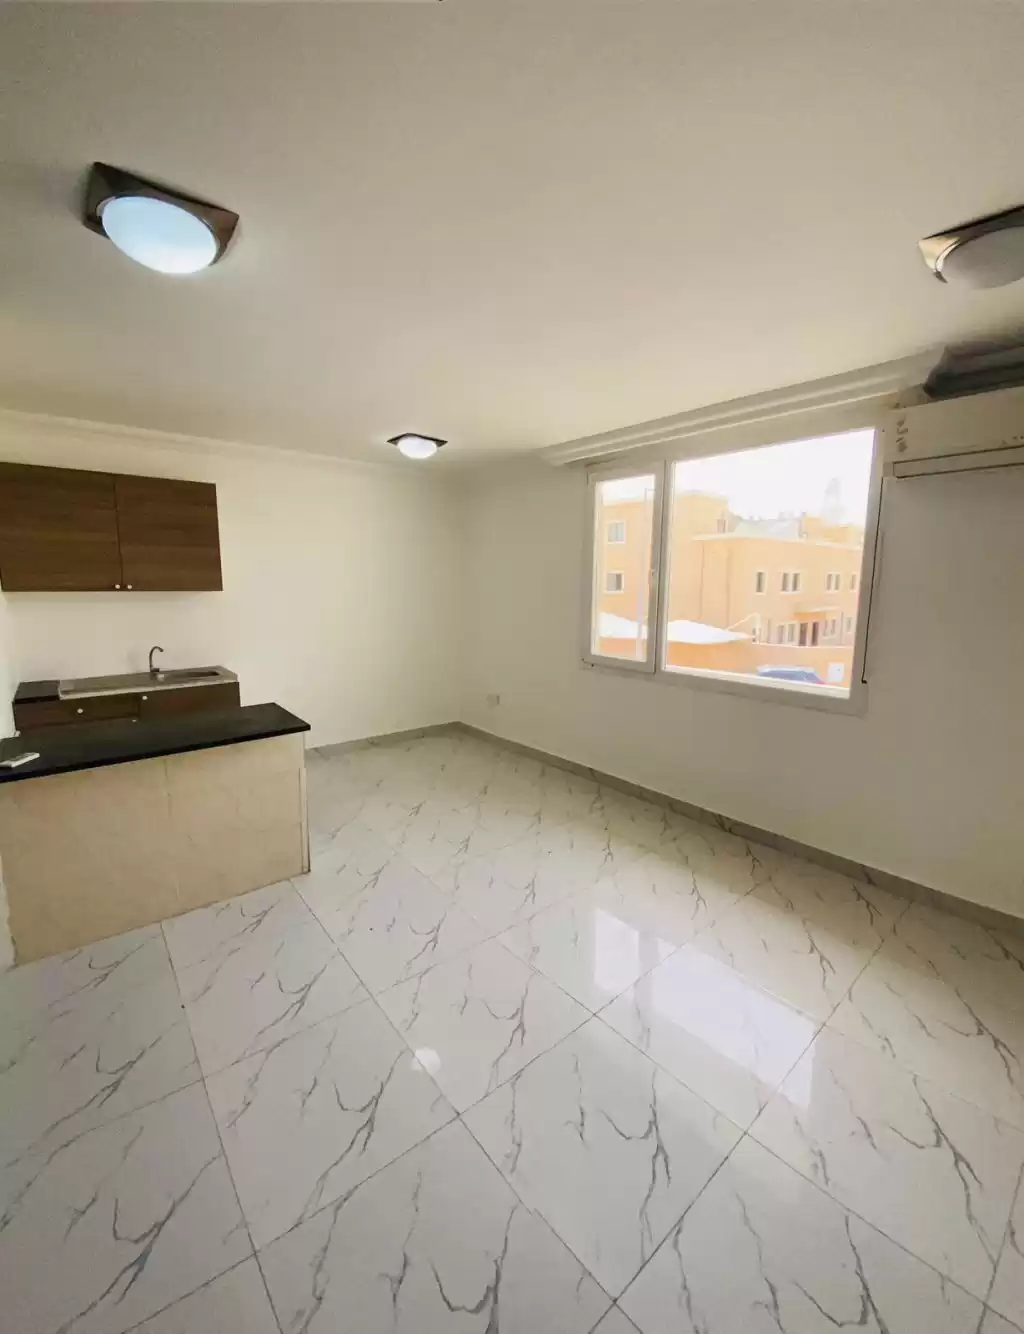 Residential Ready Property Studio U/F Apartment  for rent in Doha #14297 - 1  image 